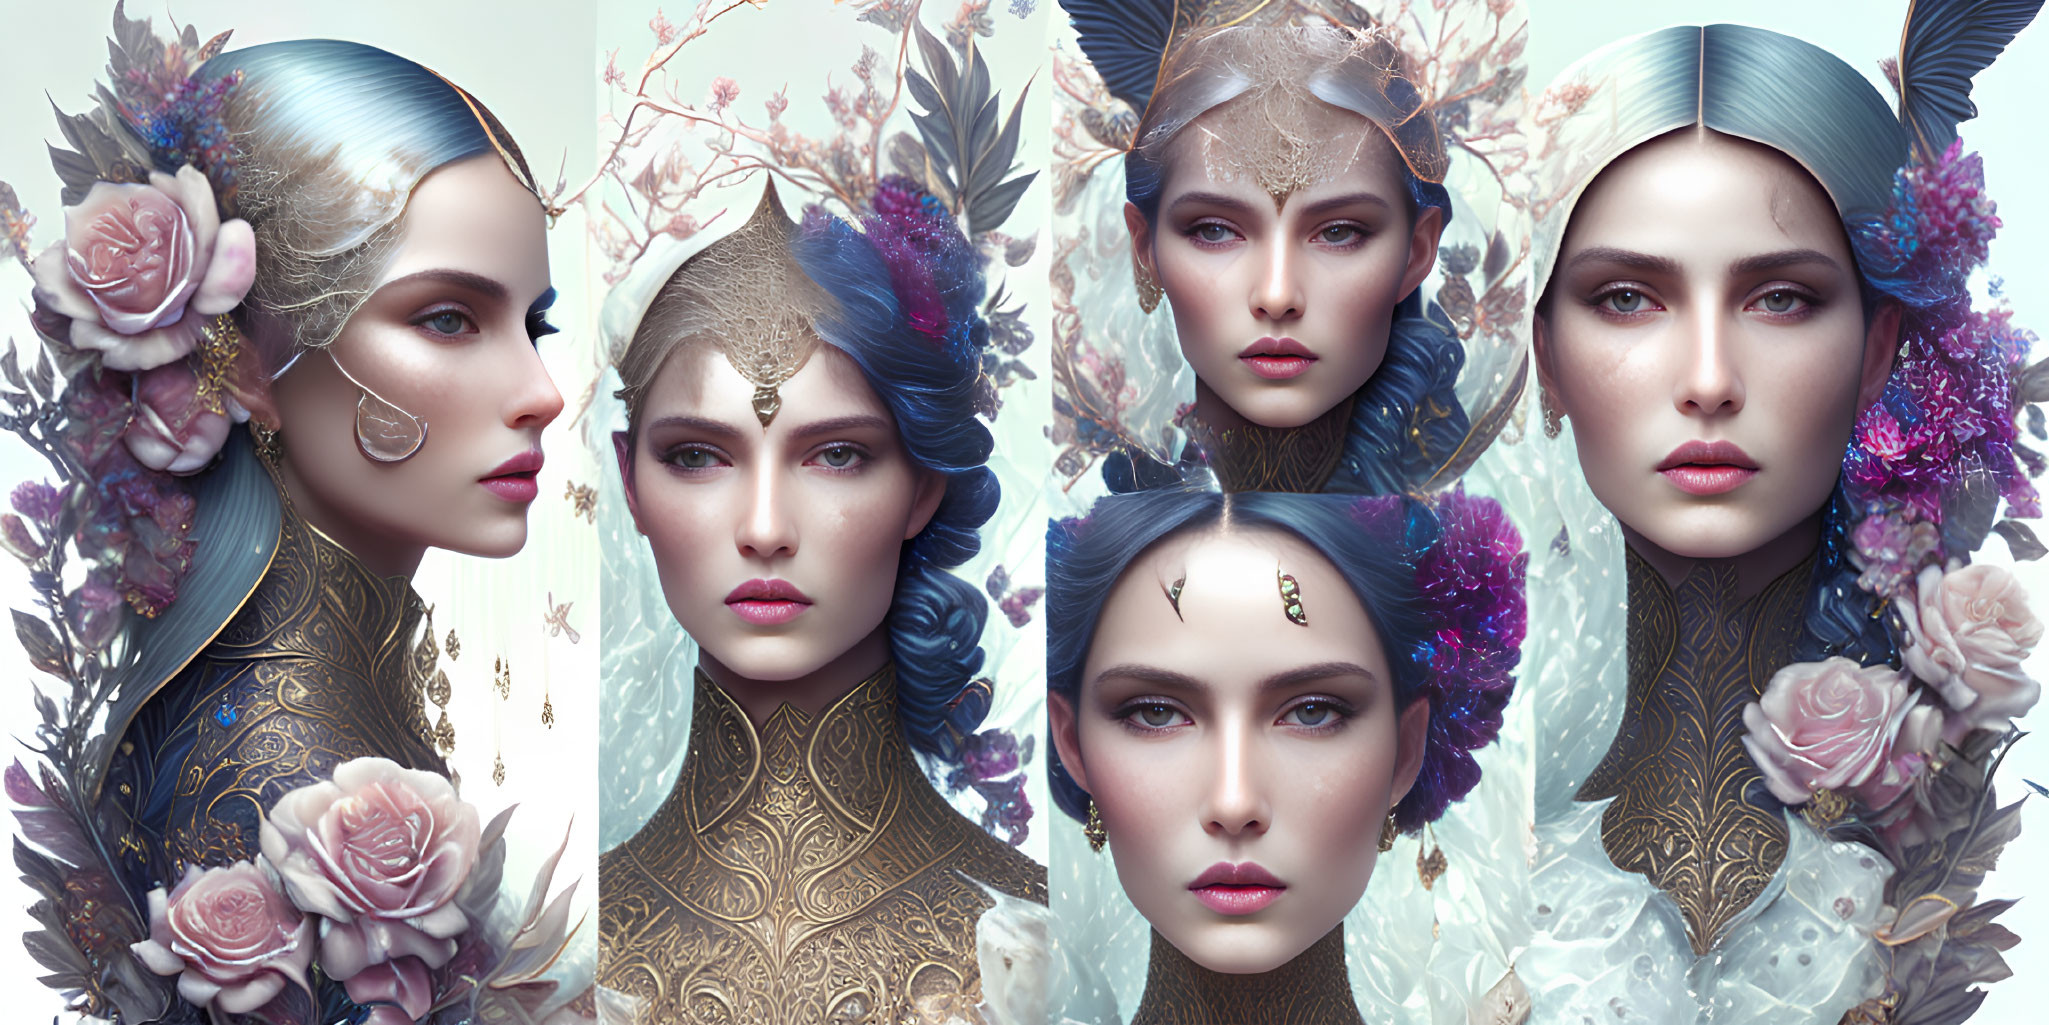 Four fantasy-style female portraits with elaborate floral headpieces in intricate foliage background